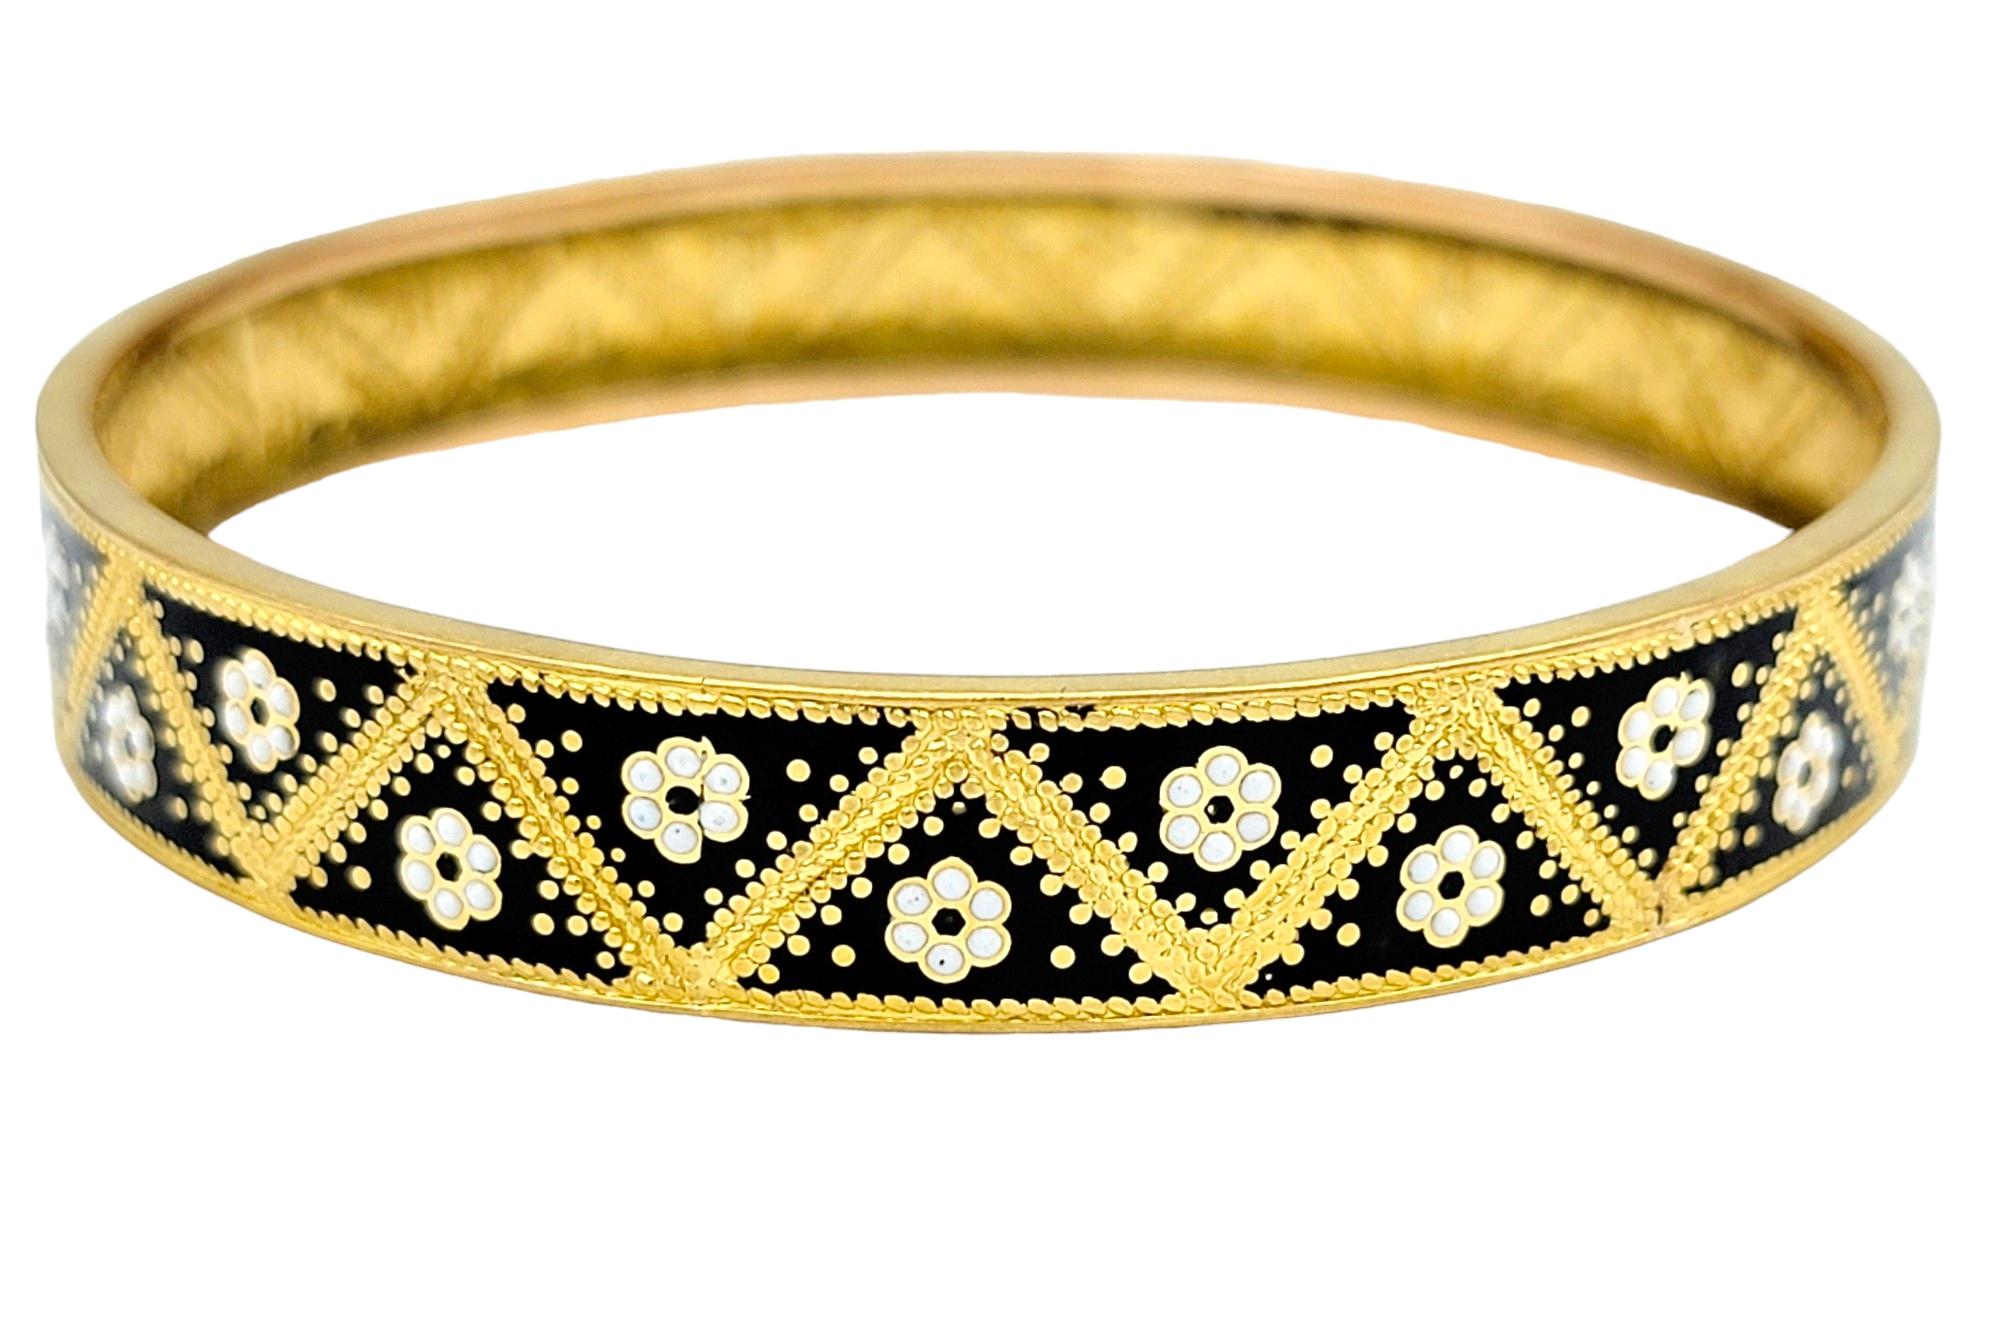 Elevate your wrist with the timeless allure of this exquisite bangle bracelet, crafted in luxurious 22 karat yellow gold. Its sleek and sophisticated design is accentuated by a delicate milgrain edging, adding a touch of vintage-inspired charm to